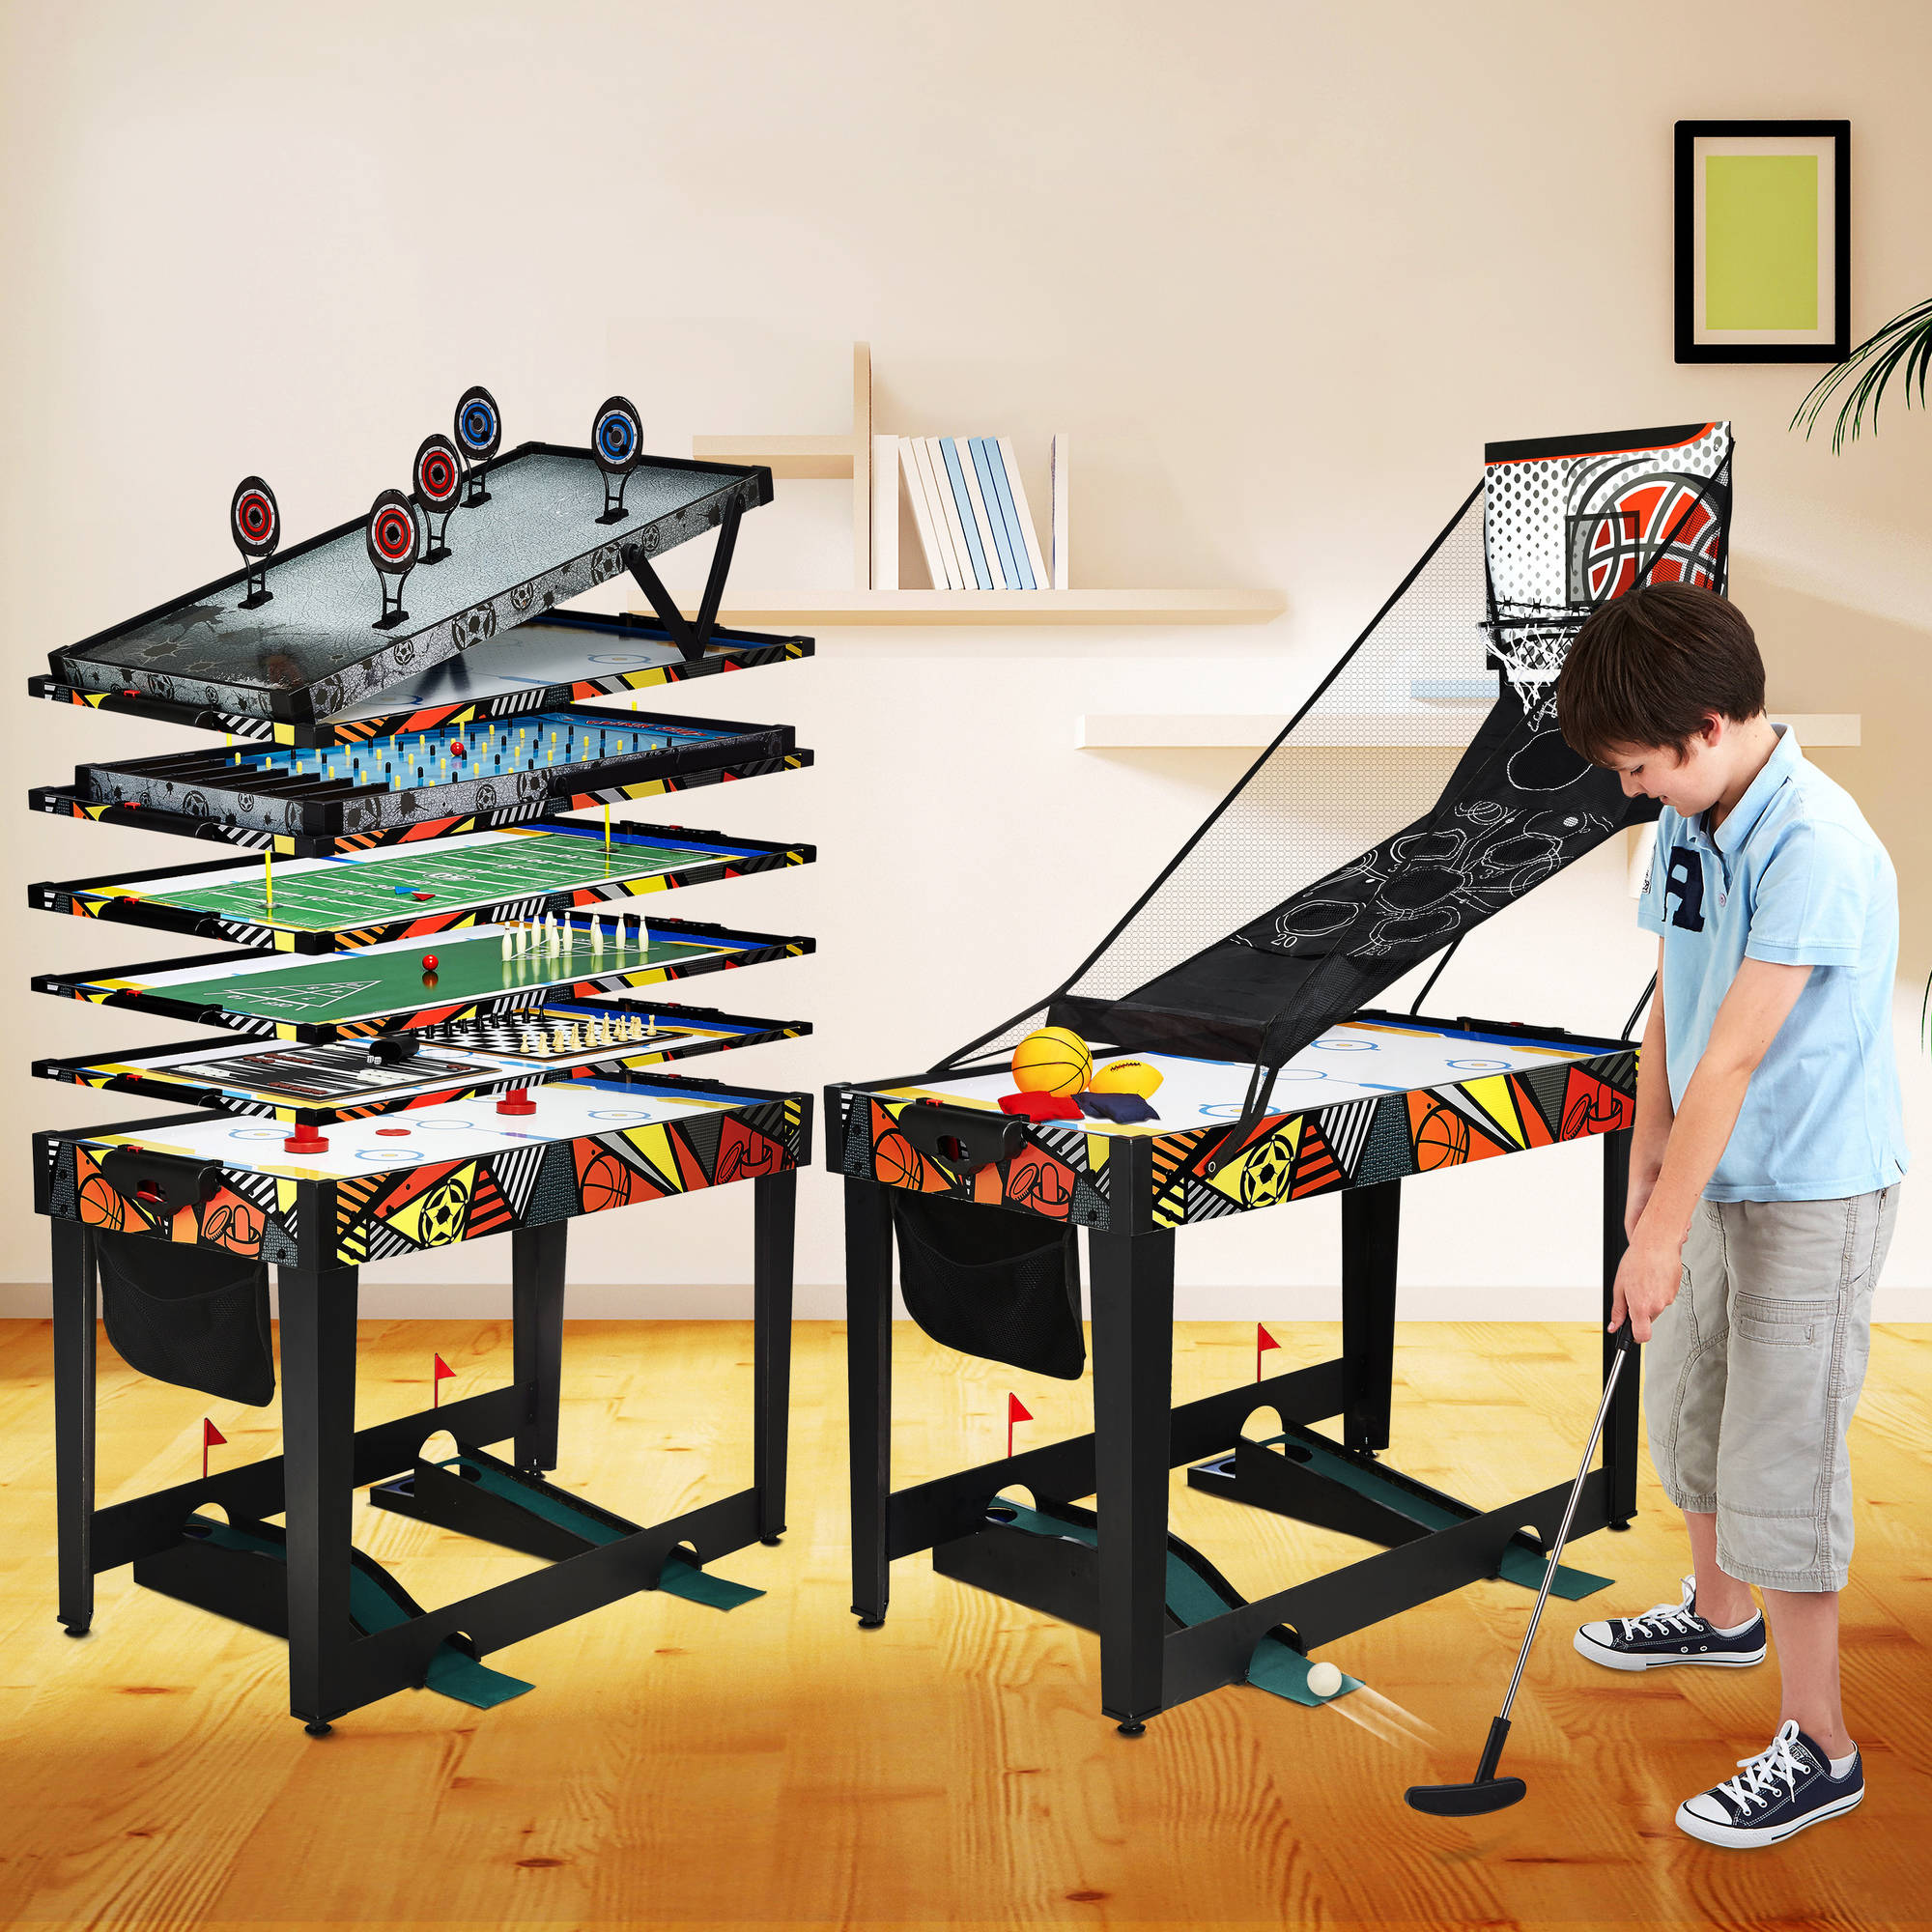 48" 12-in-1 Multi-Activity Combination Game Table - image 4 of 11